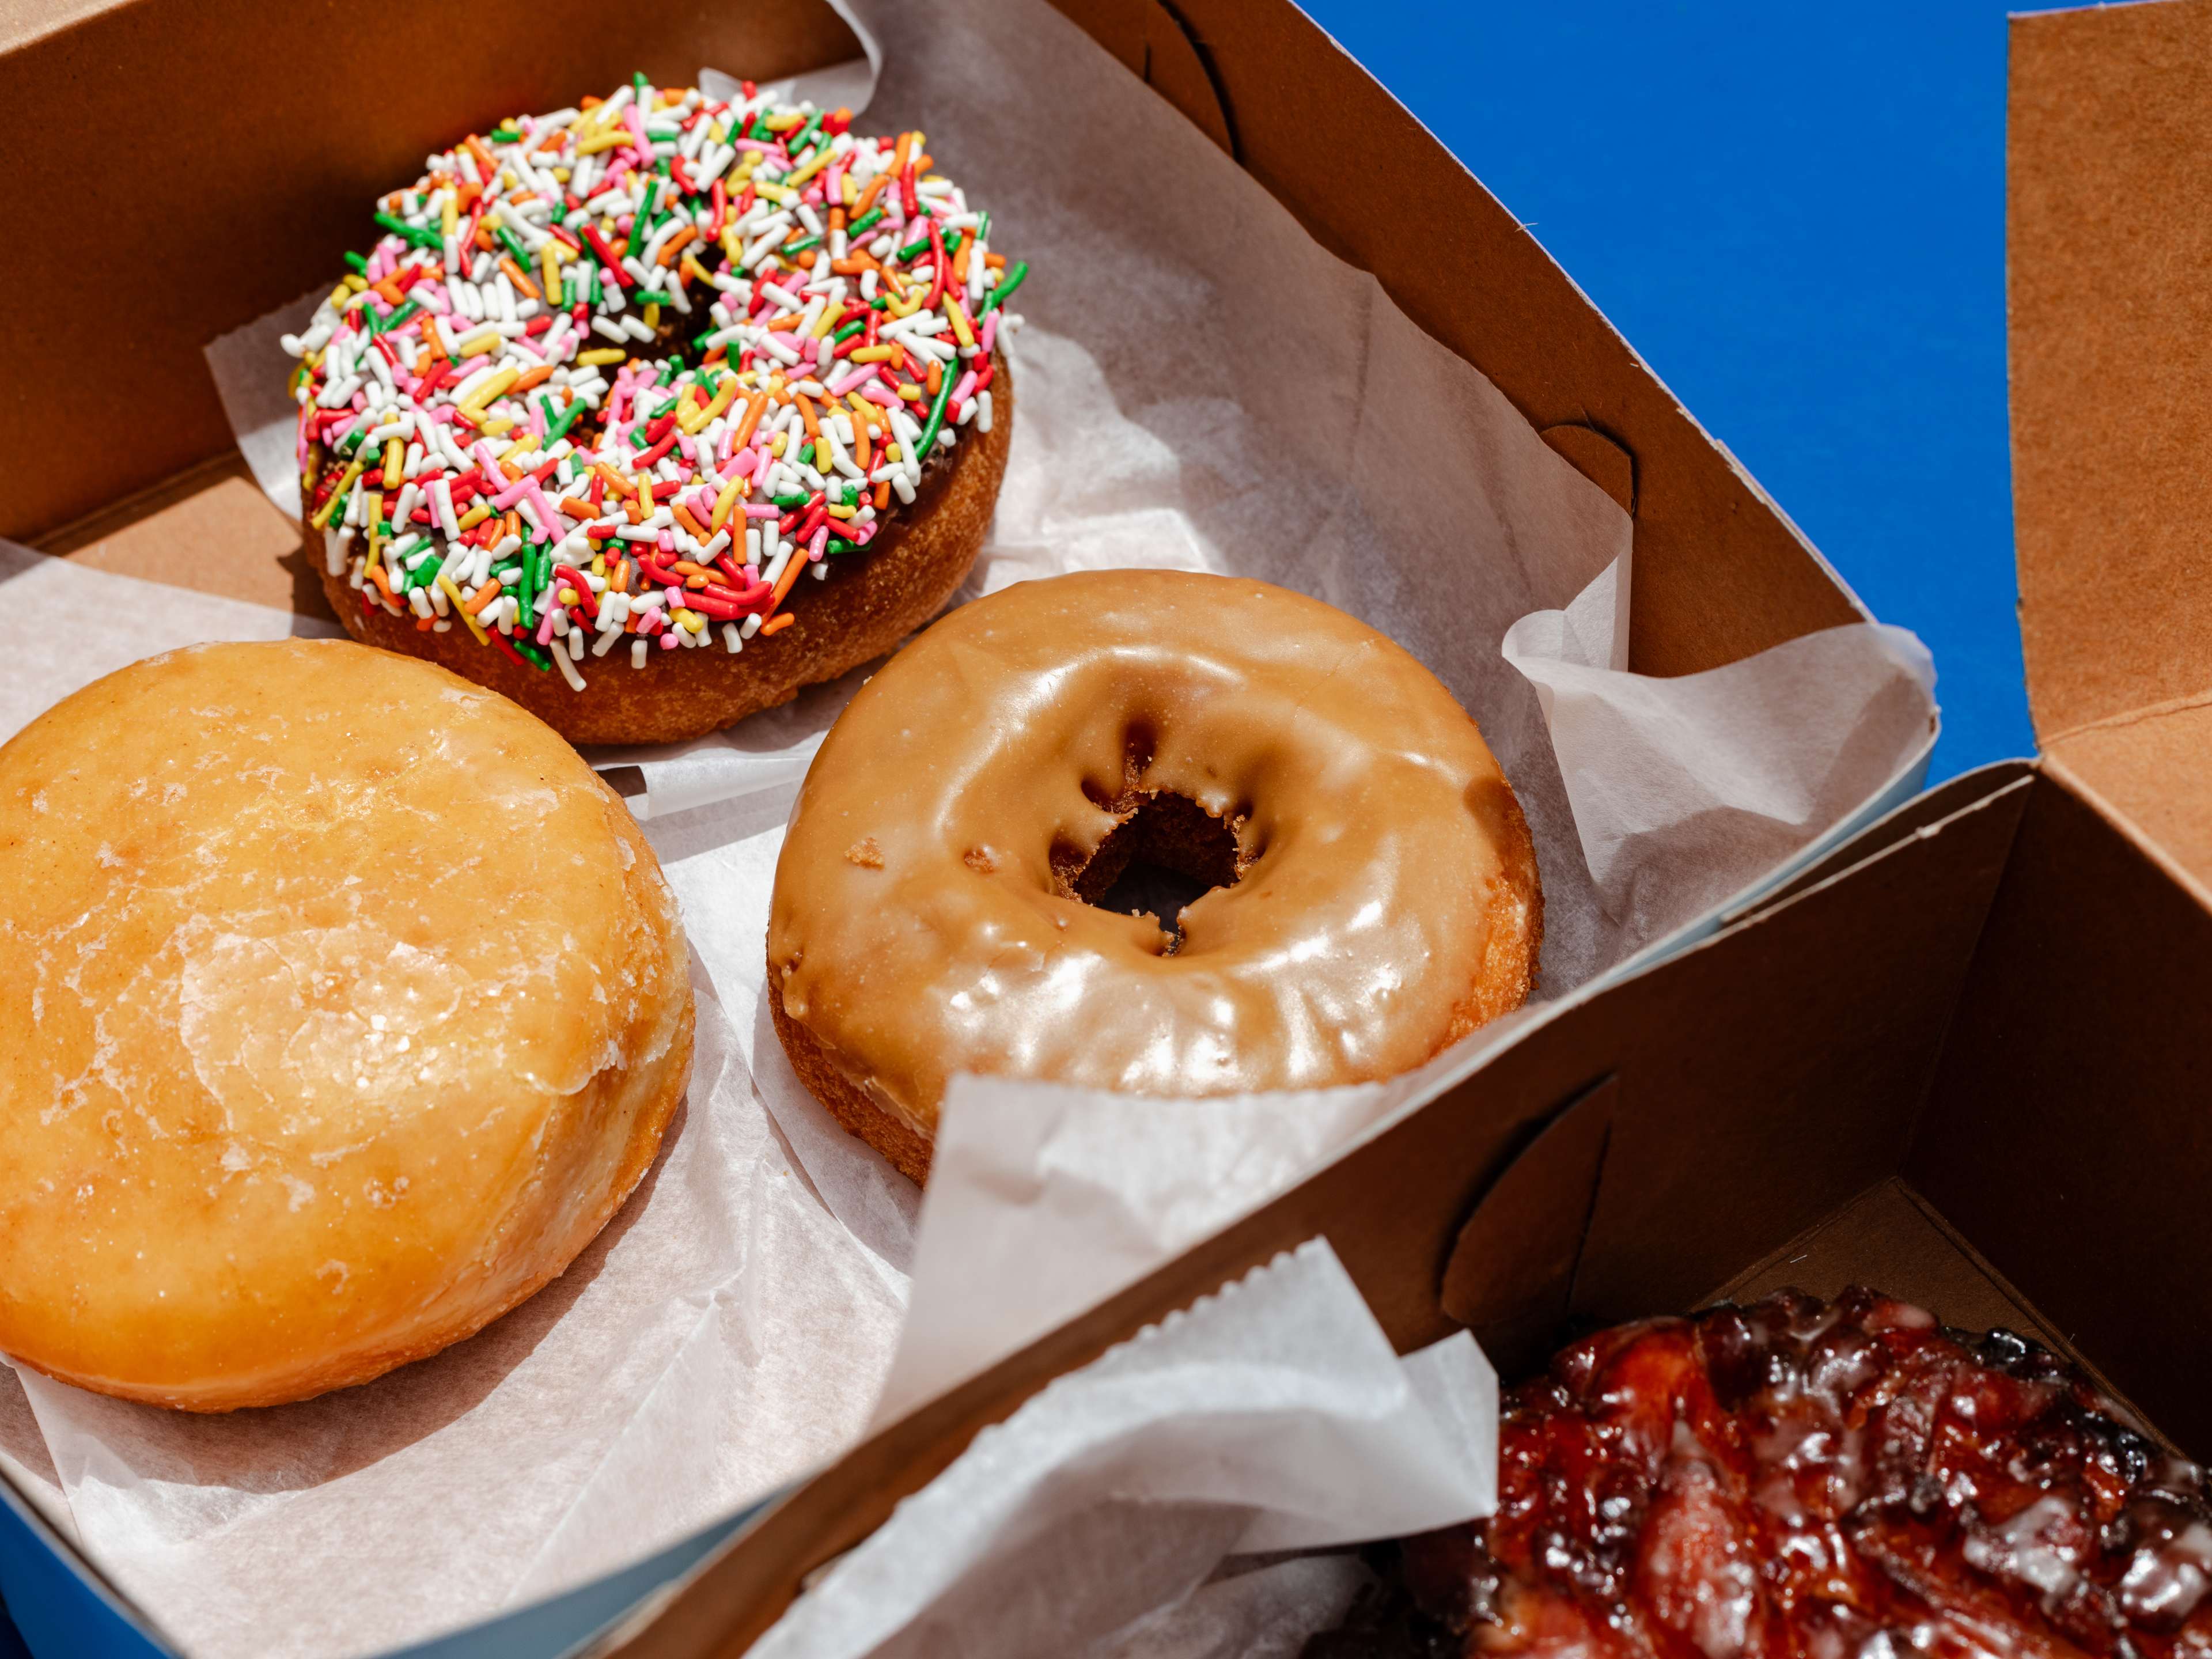 The Best Donuts In LA image